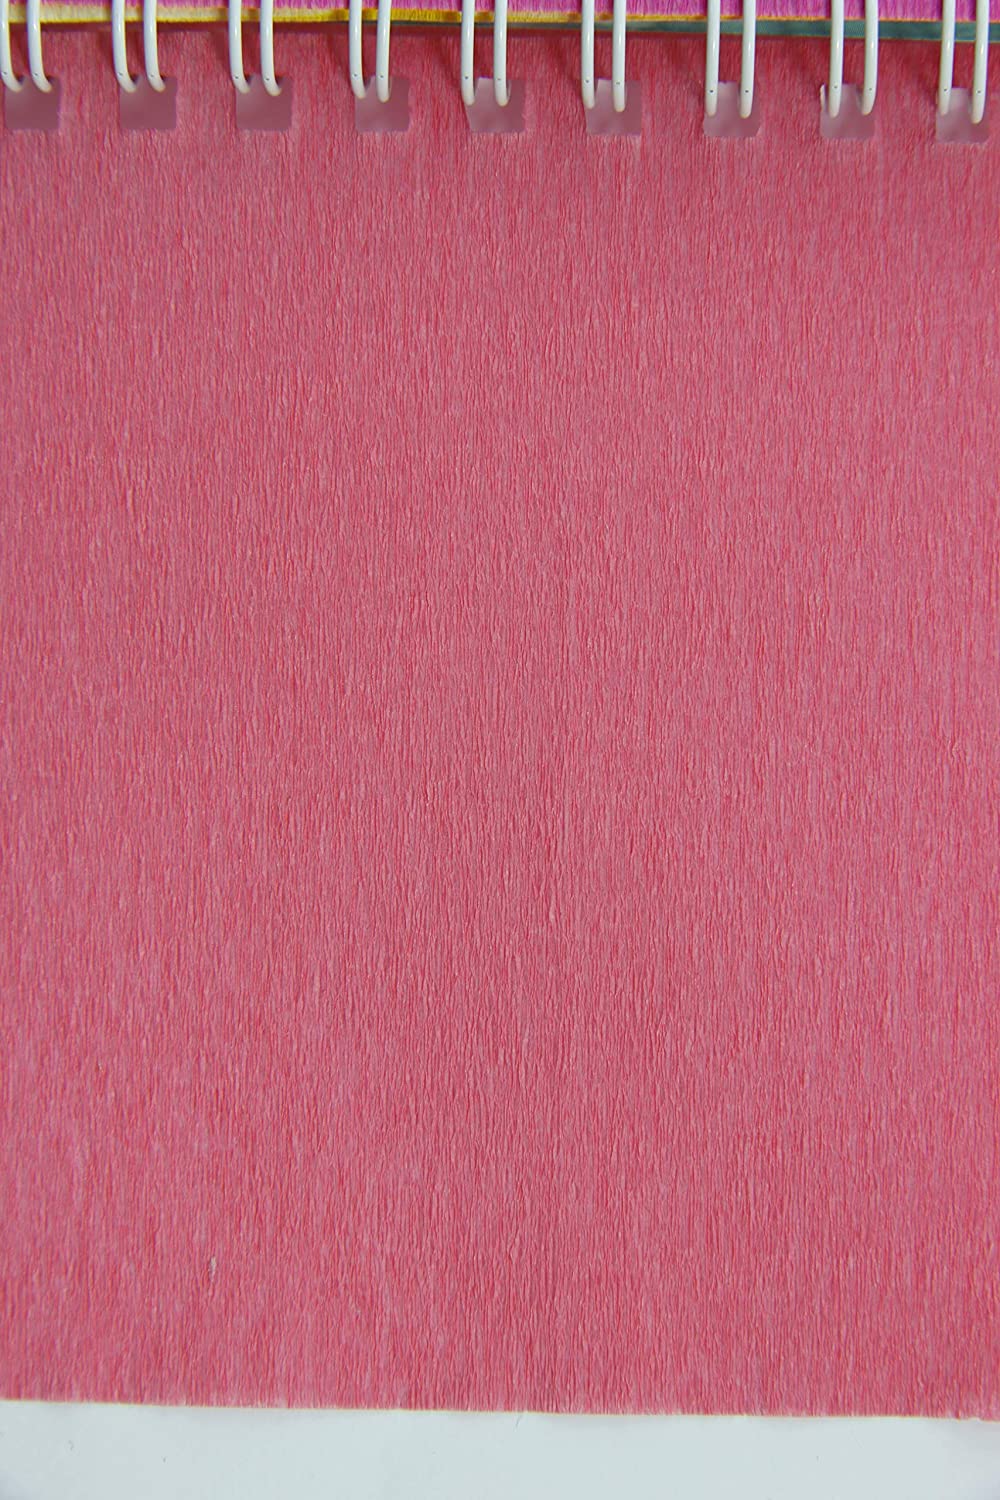 CLAIREFONTAINE Crepe Paper Roll 75% 2.5x0.5M Salmon Pink